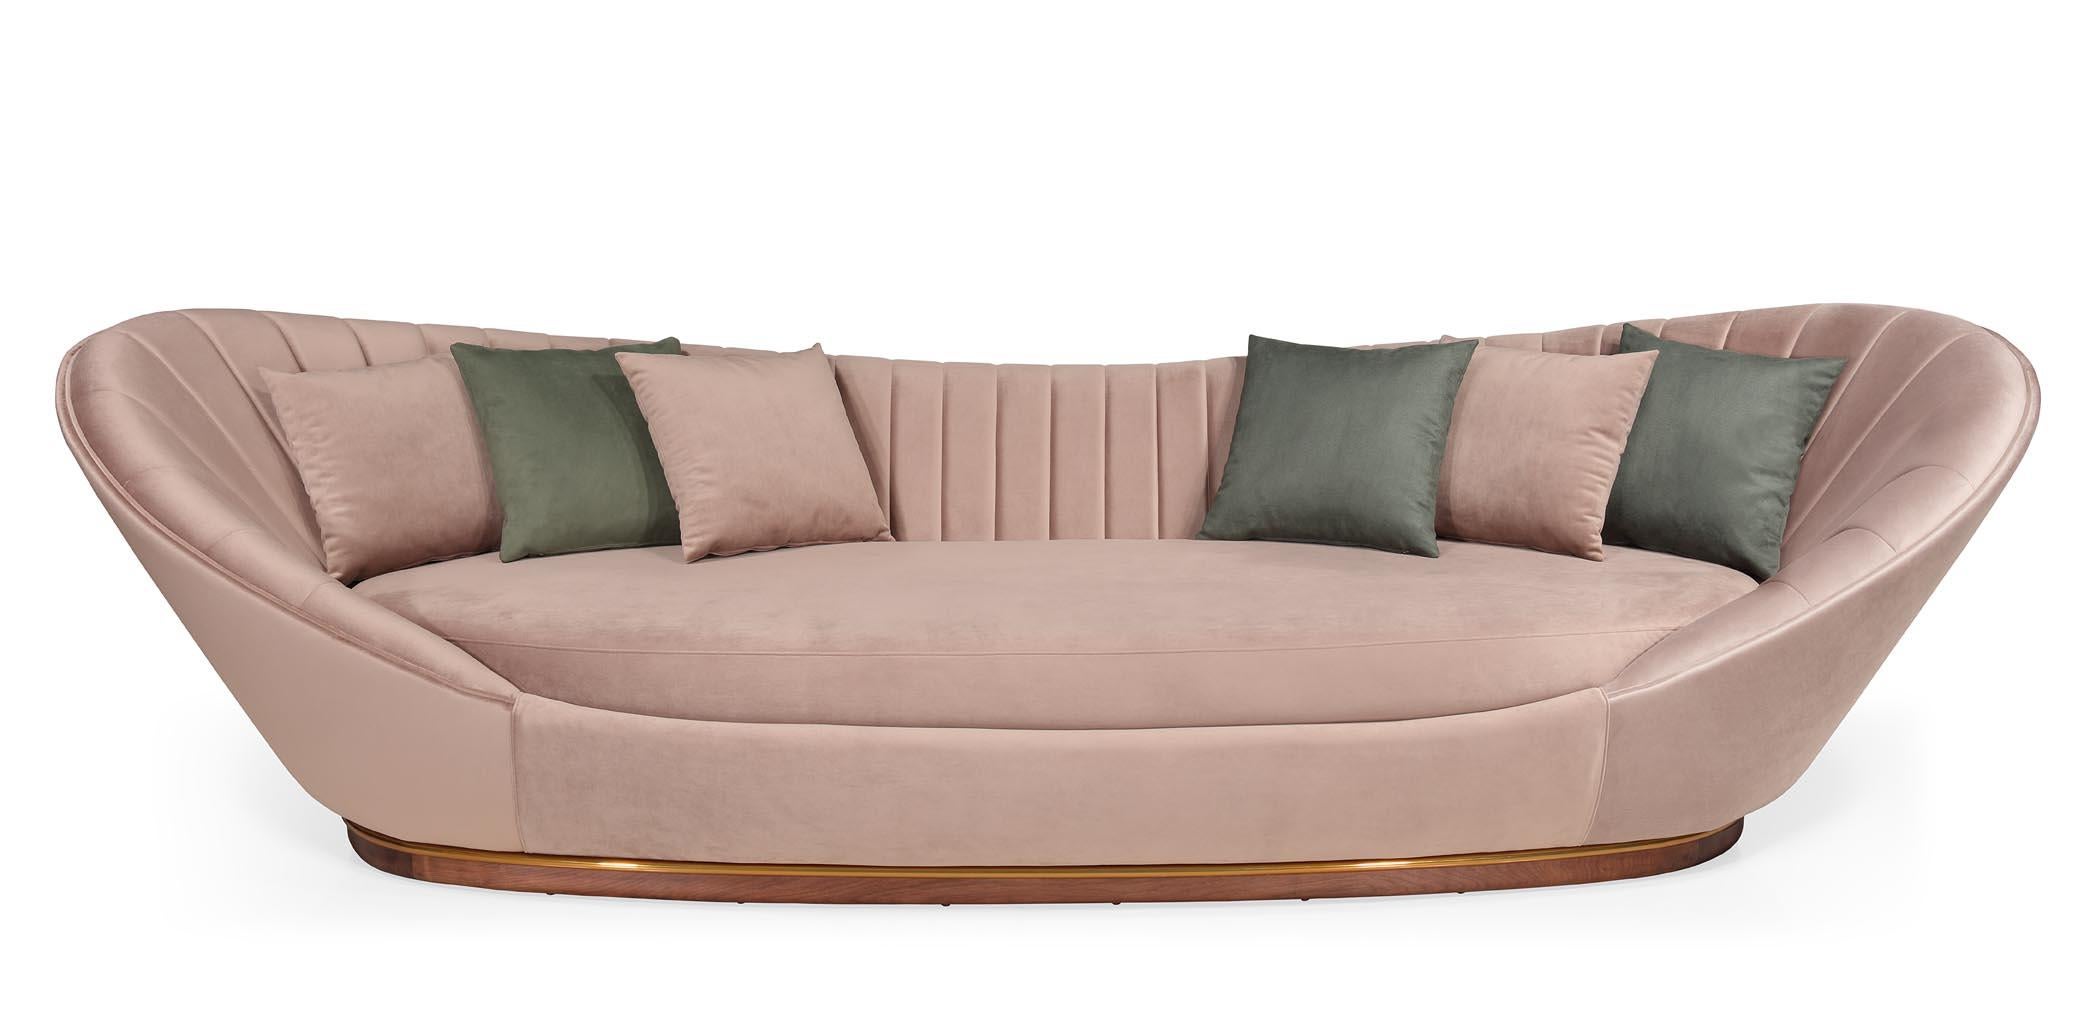 A true statement of luxury
Combining the finest and ancient craftsmanship with luxurious levels of design, quality, and comfort. 

Wonatti Davos Sofa, Footer Solid Walnut wood, Beige Upholstery Portuguese Velvet, Stainless Steel Footer Detail,